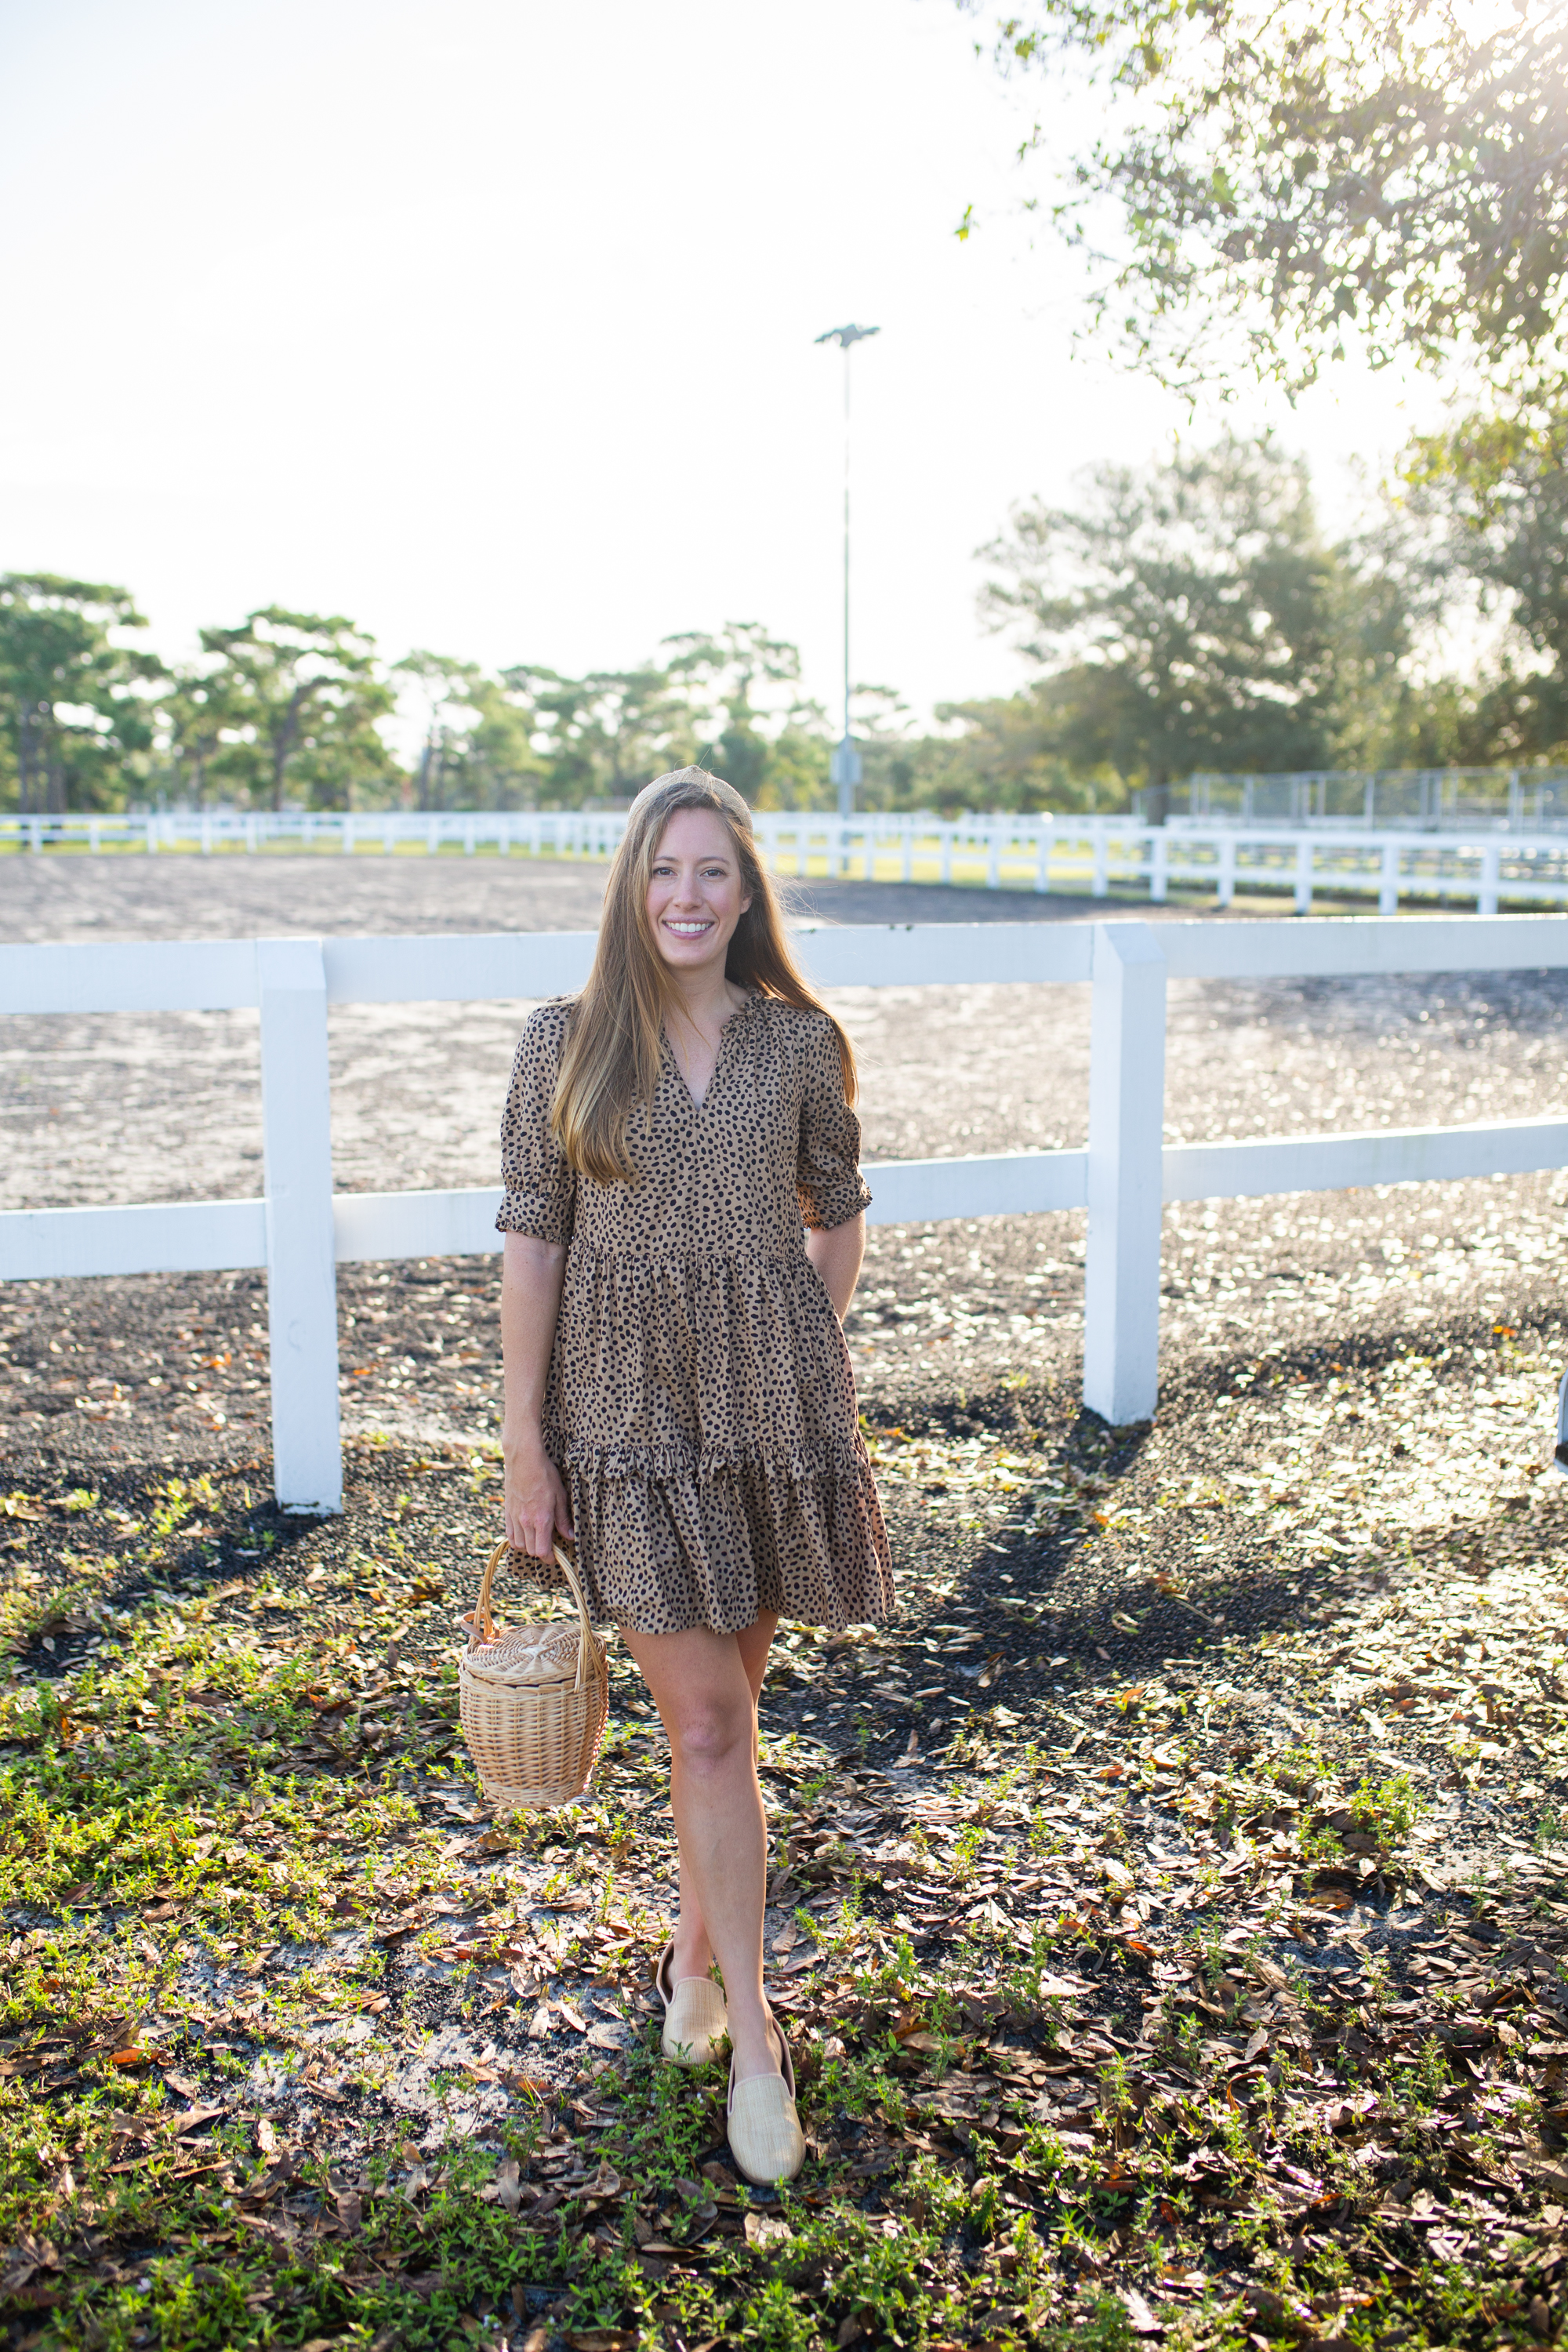 Leopard Print Dress / How to Style a Leopard Dress for Fall / Fall Outfit Idea / Casual Fall Outfit / Autumn Outfits / Leopard Print Dress Outfit Fall - Sunshine Style, A Florida Fashion and Lifestyle Blog by Katie